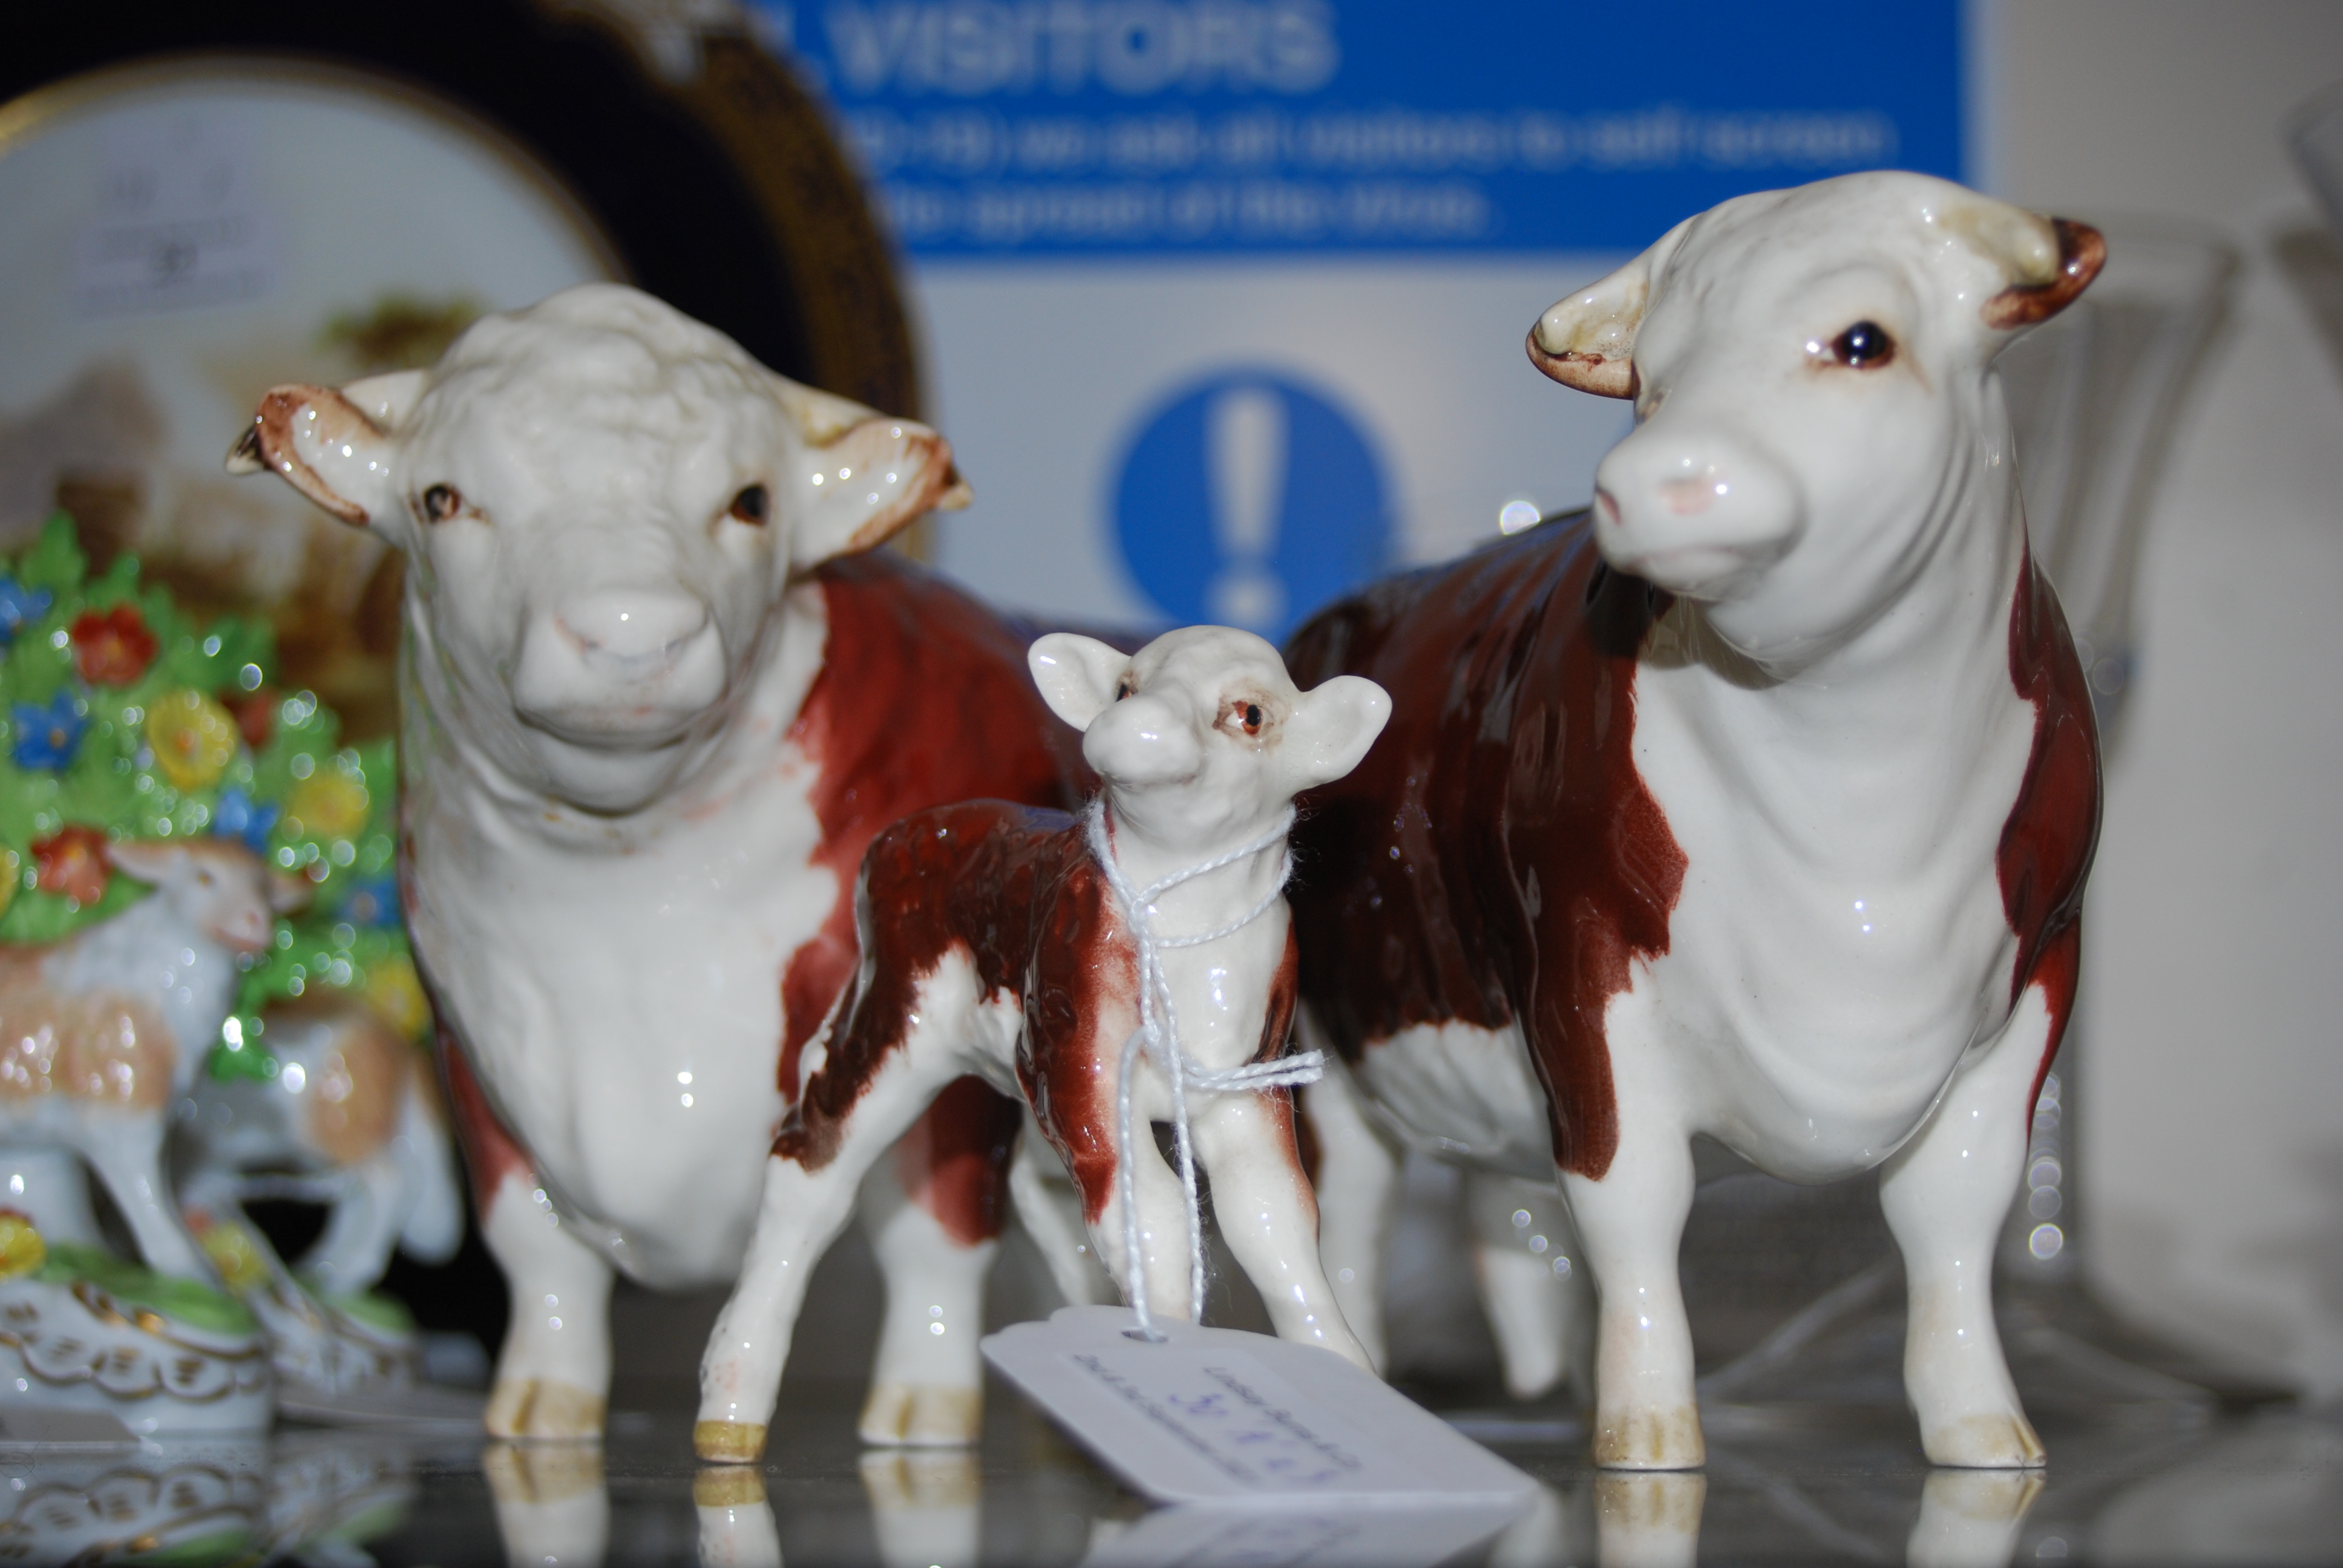 A GROUP OF THREE BESWICK 'CHAMPION OF CHAMPIONS' CATTLE TO INCLUDE BULL, COW AND CALF WITH BROWN